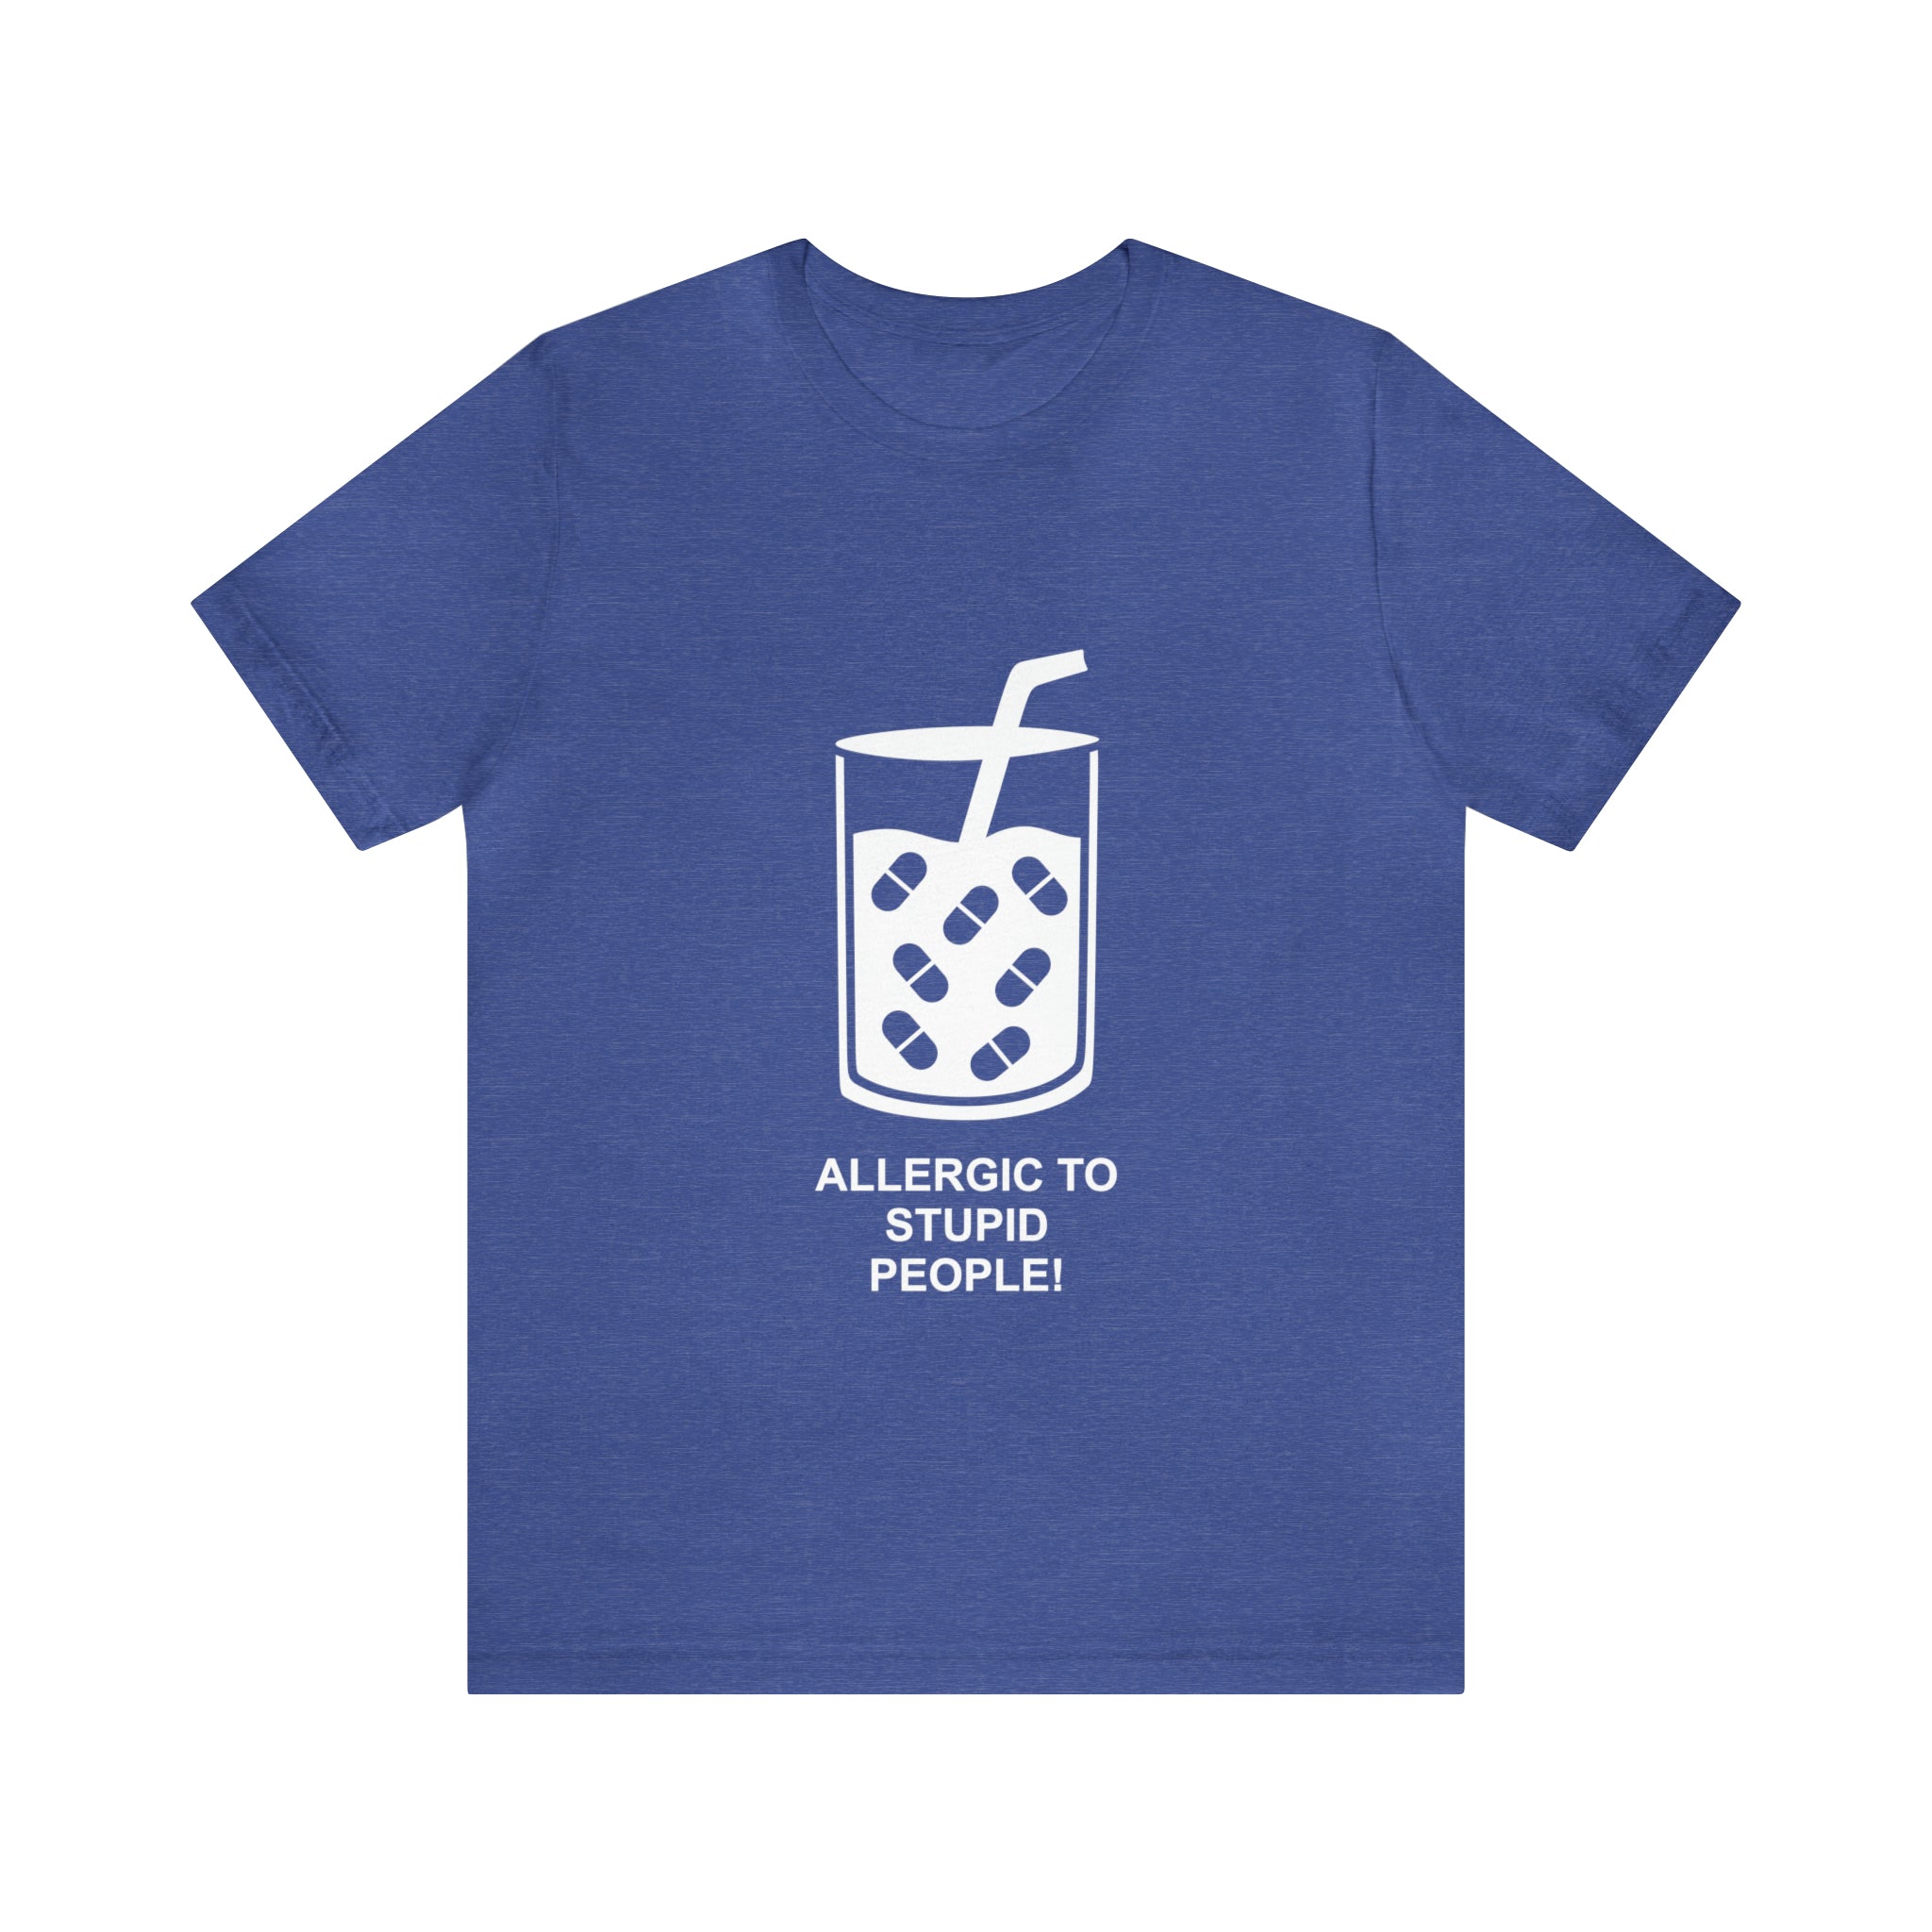 A blue Allergic to Stupid People T-Shirt.